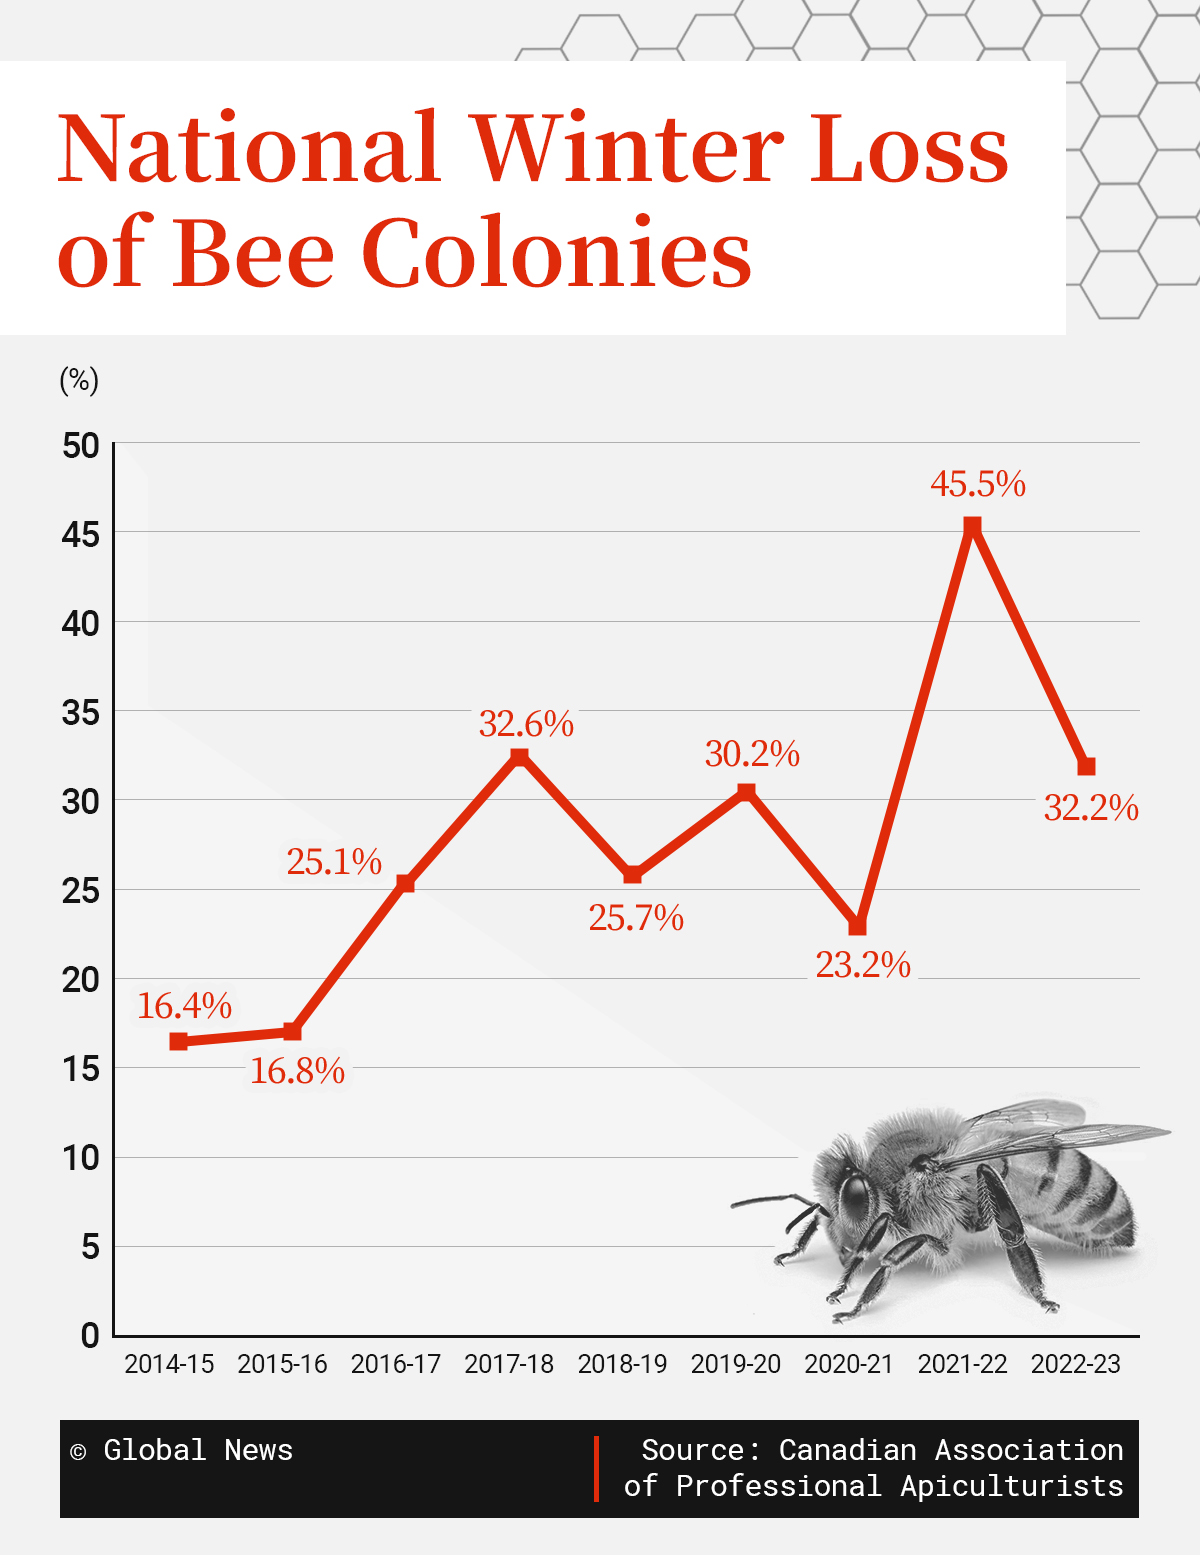 Canada is relying on queen bee imports. Why it’s a risky crutch